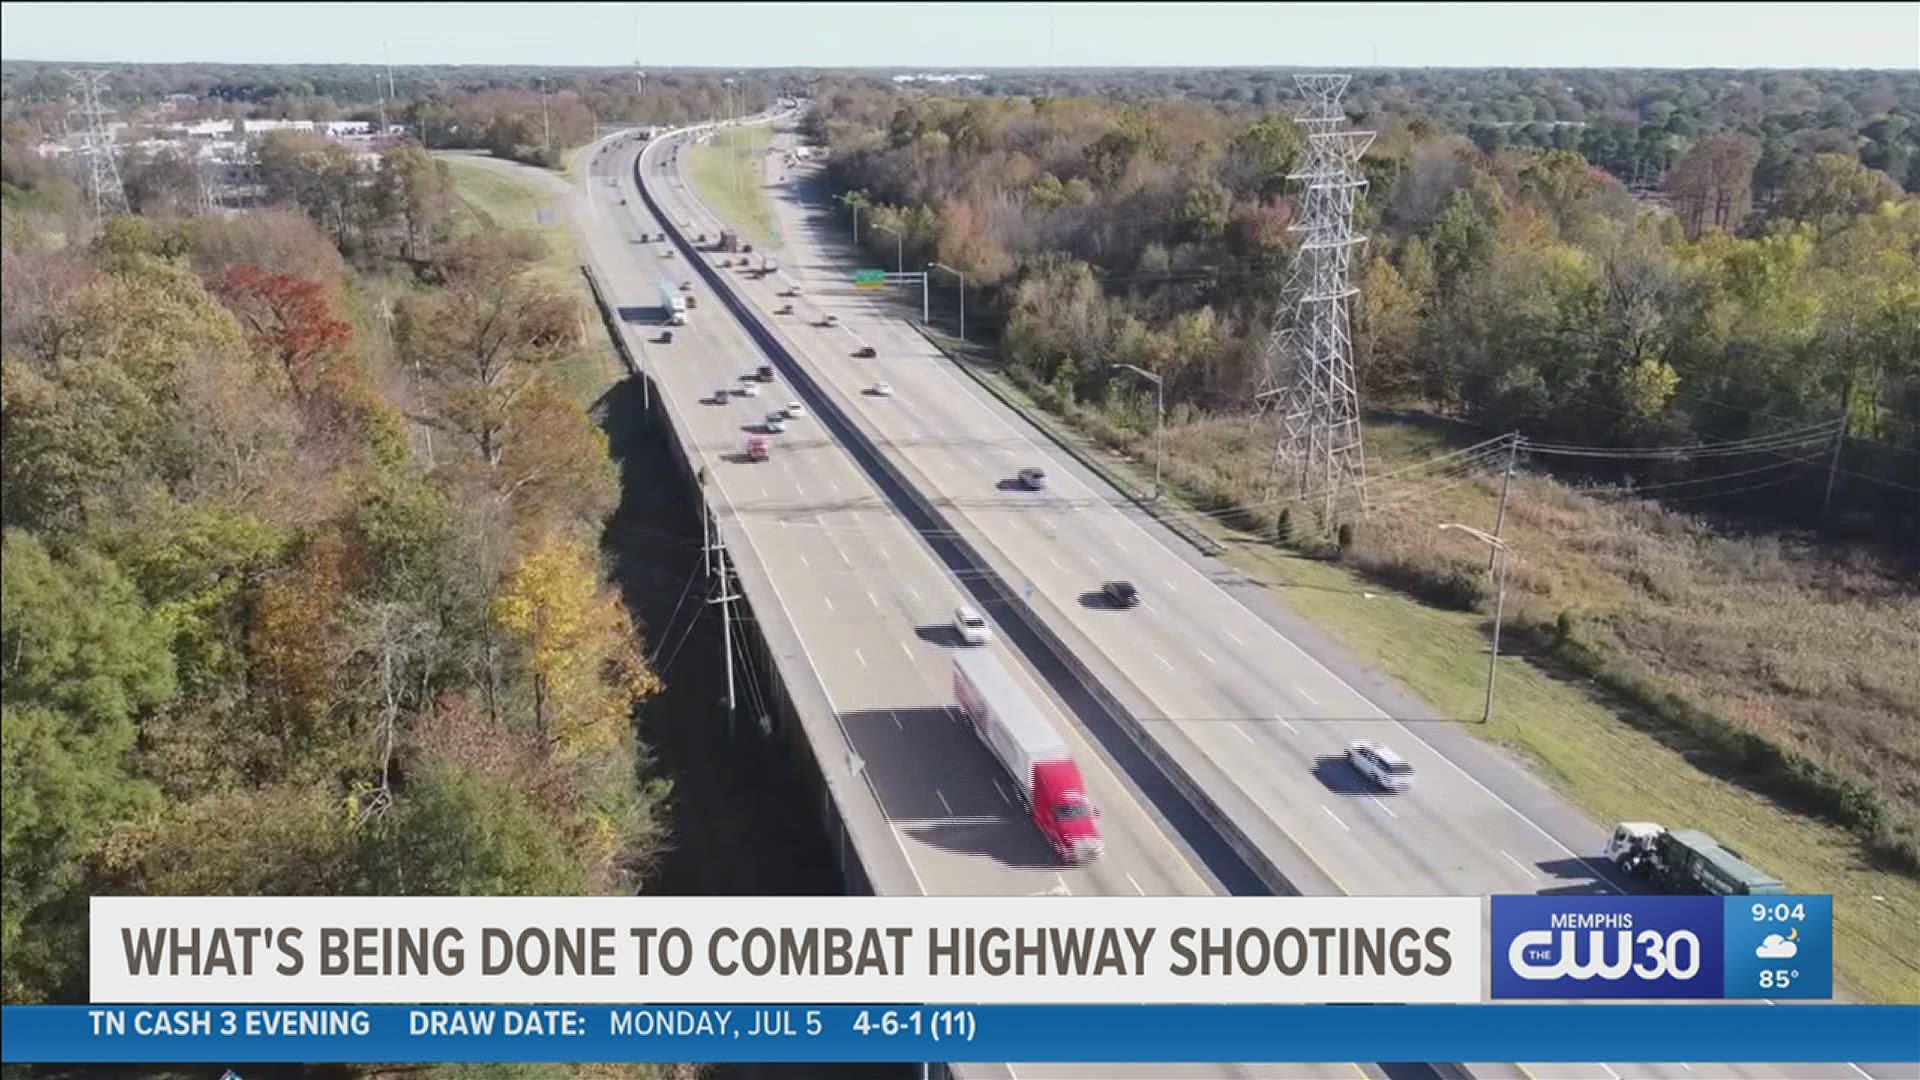 There have been at least 69 highway shootings since the start of the year.